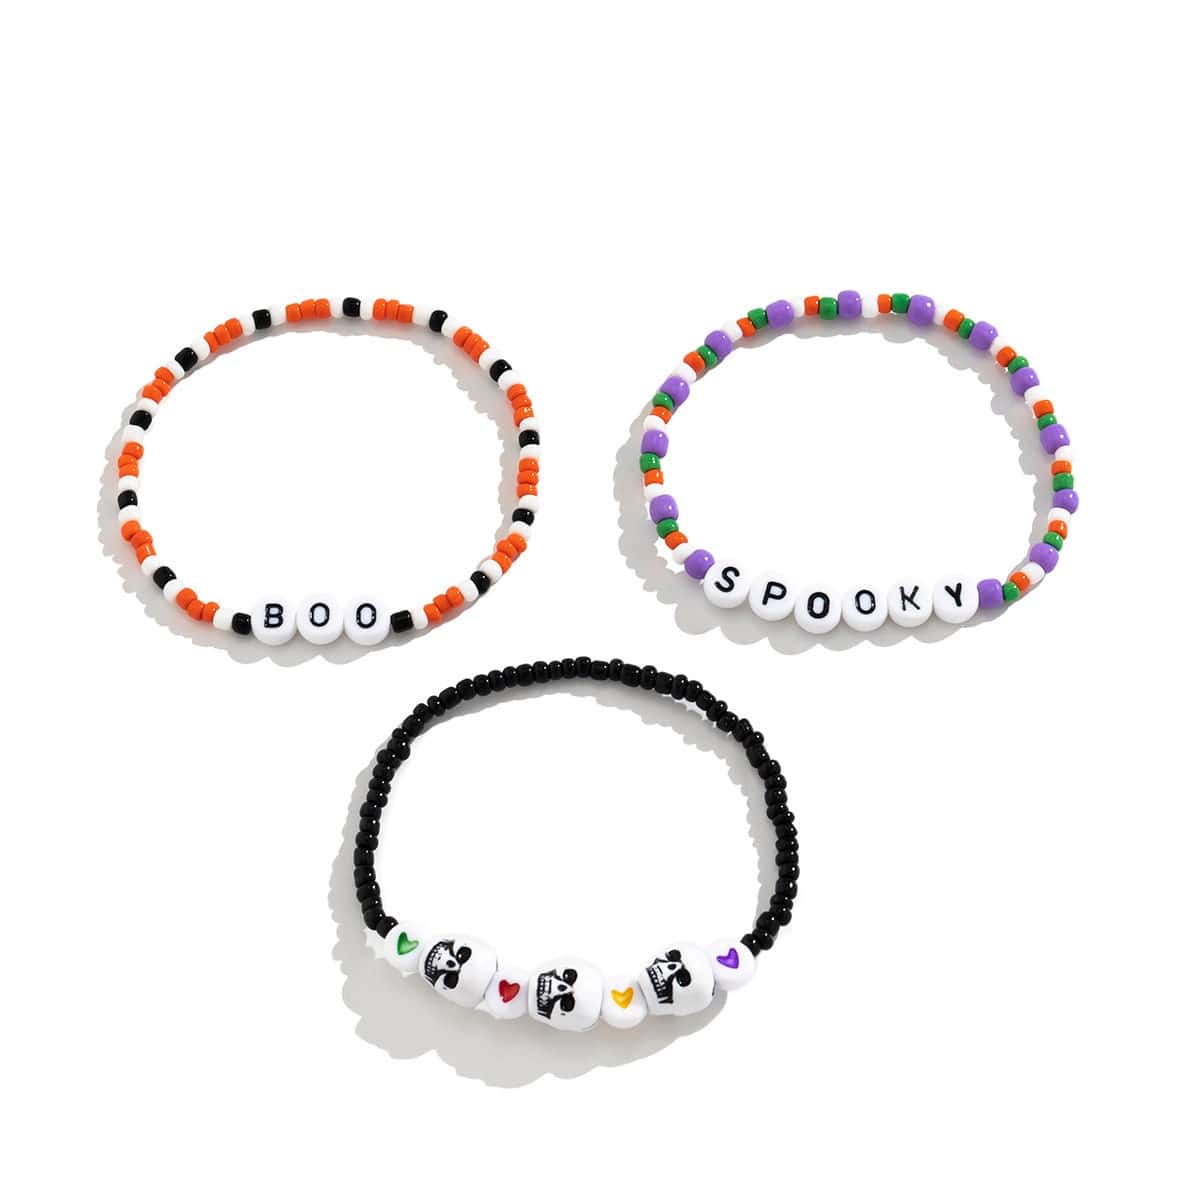 Chic 3 Pieces Letter Heart Charm Seed Bead Stackable Bracelet Set